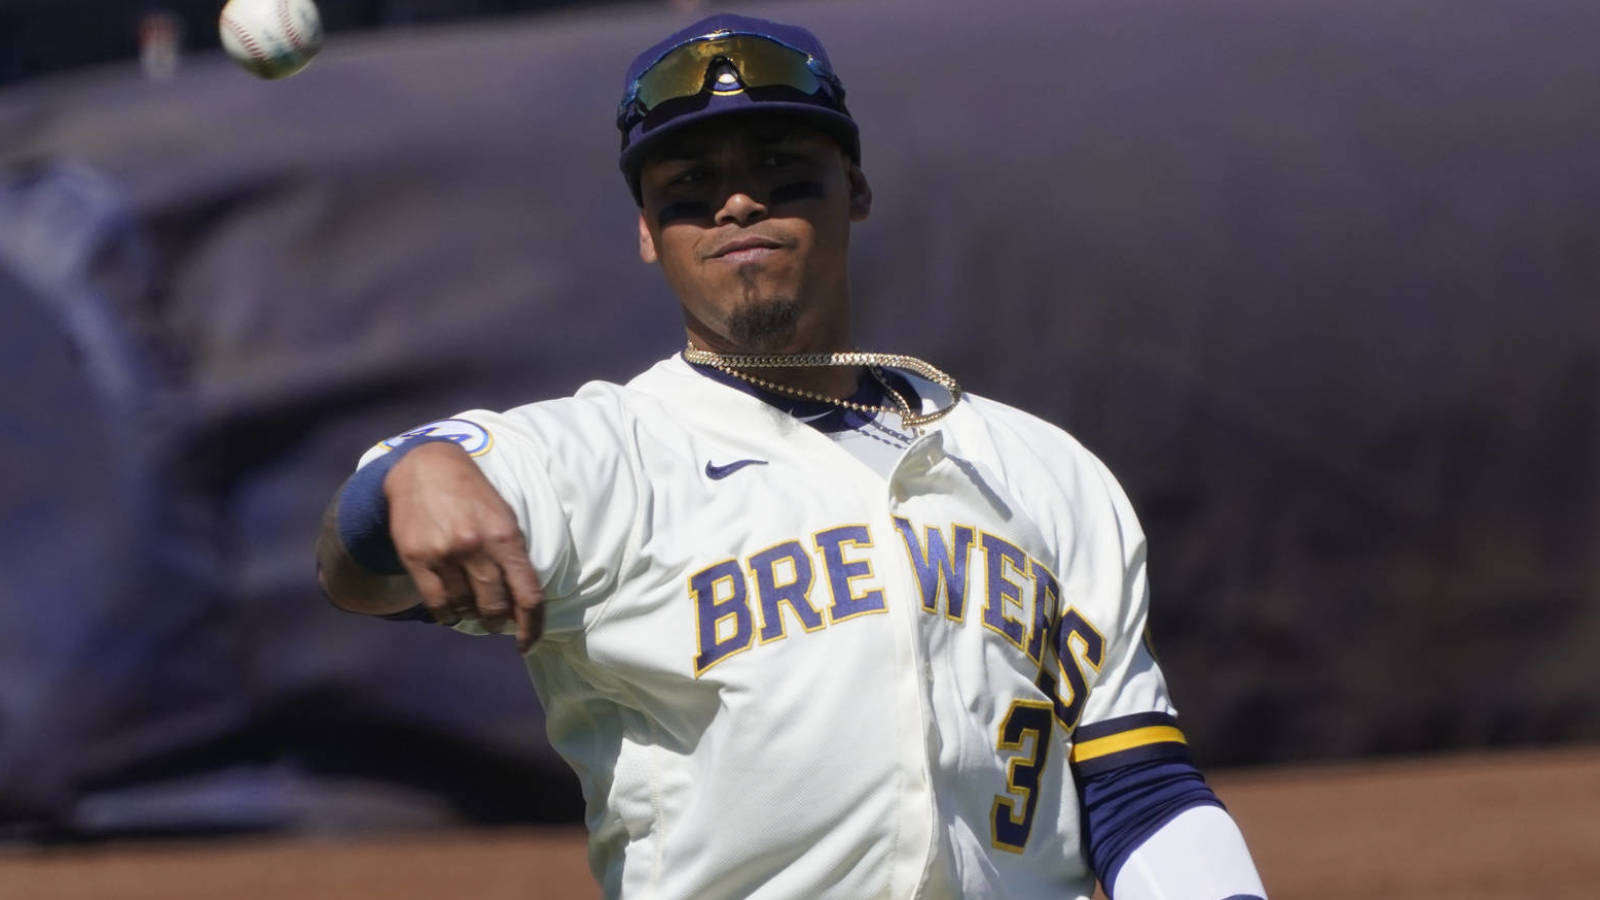 Brewers could start Arcia in SS, Shaw in 3B